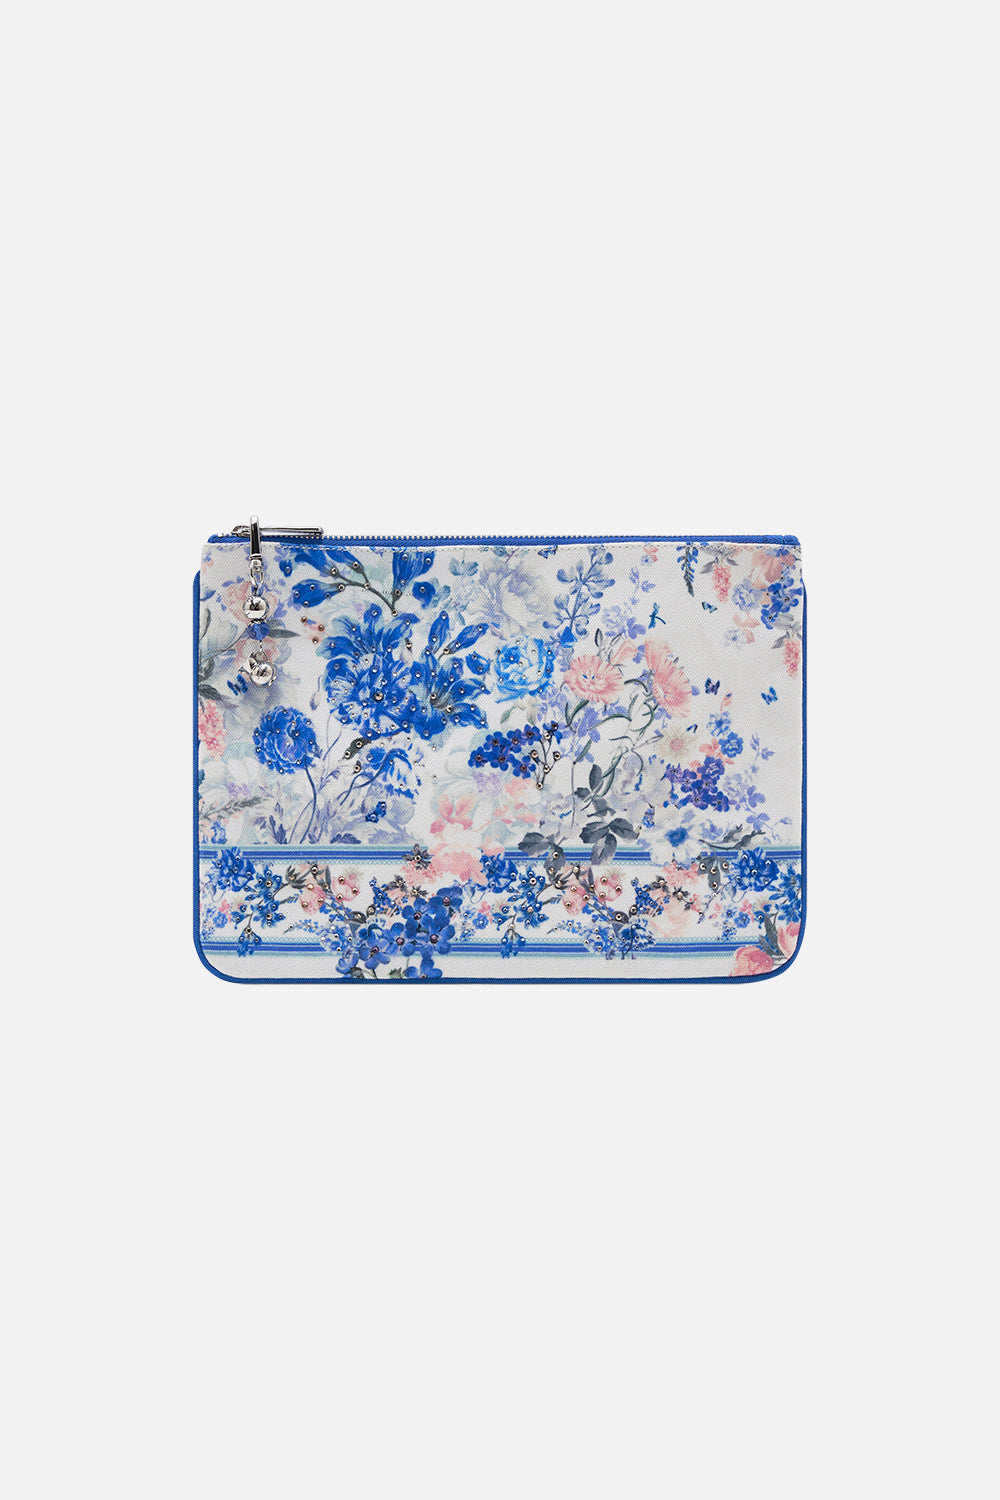 Product view of CAMILLA small clutch in blue Tuscan Moondance print